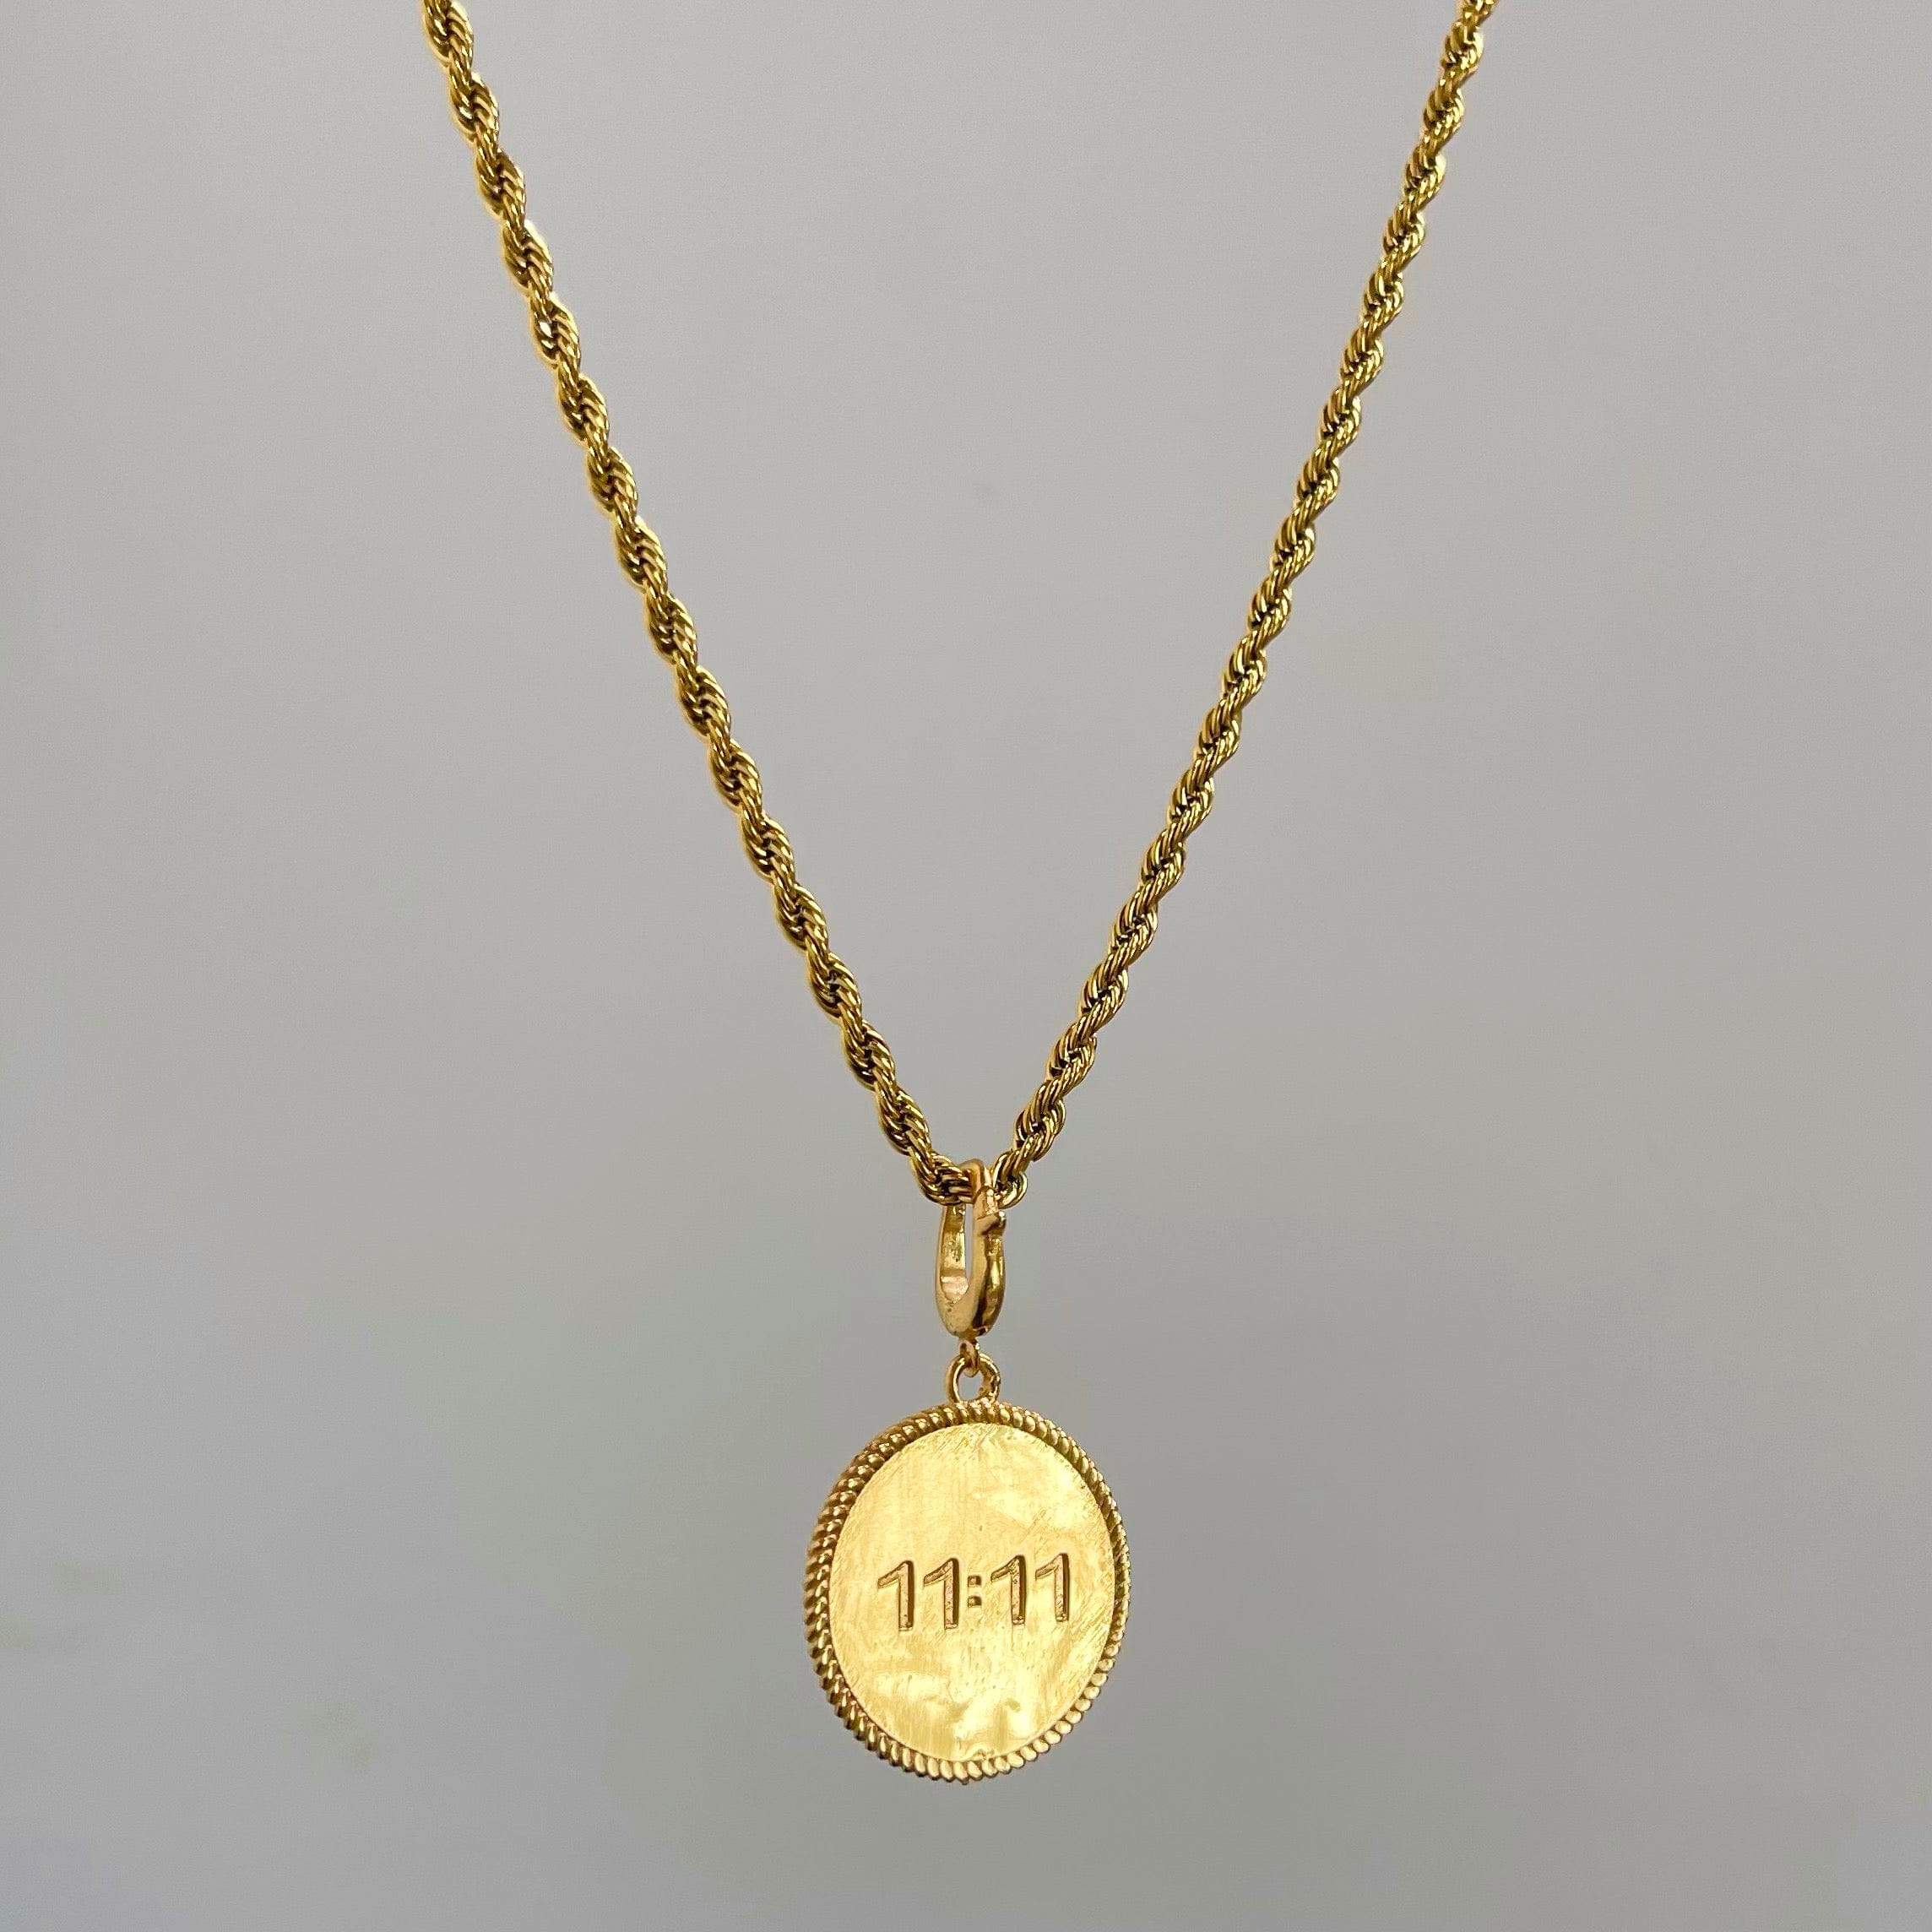 Envy Gold Layered Charm Necklace